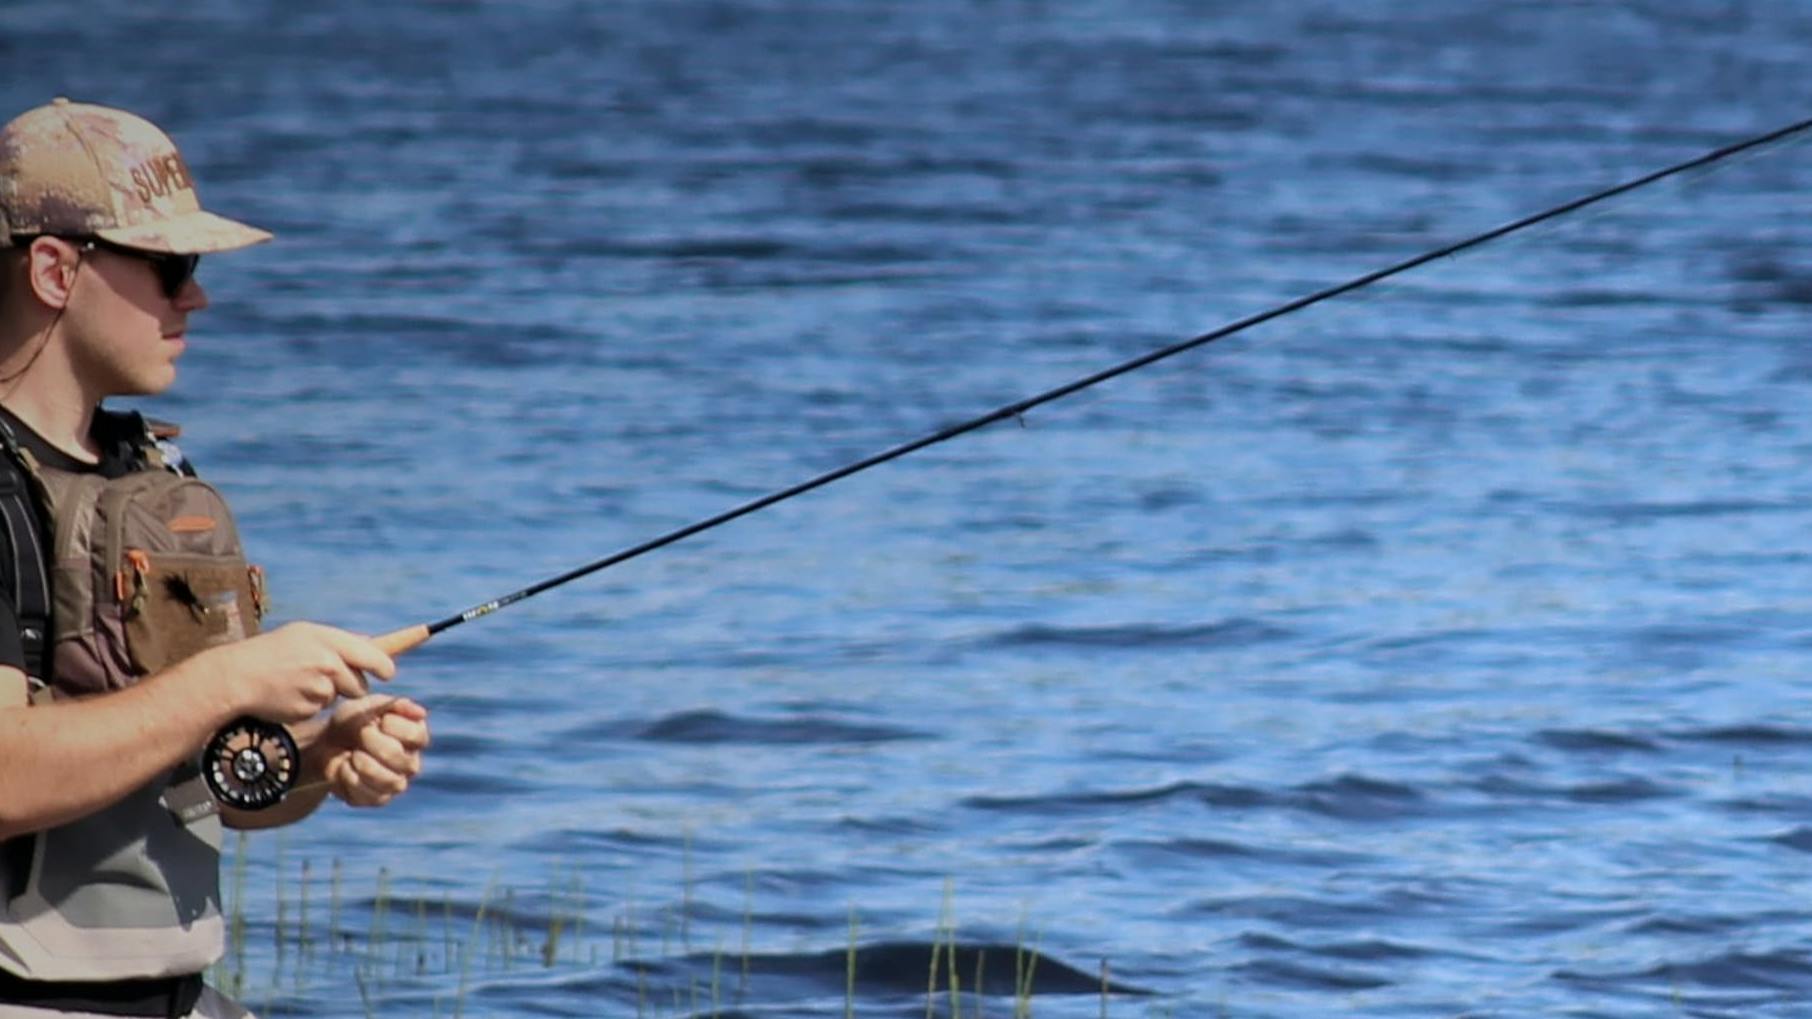 A man standing in a body of water casting a fly rod.